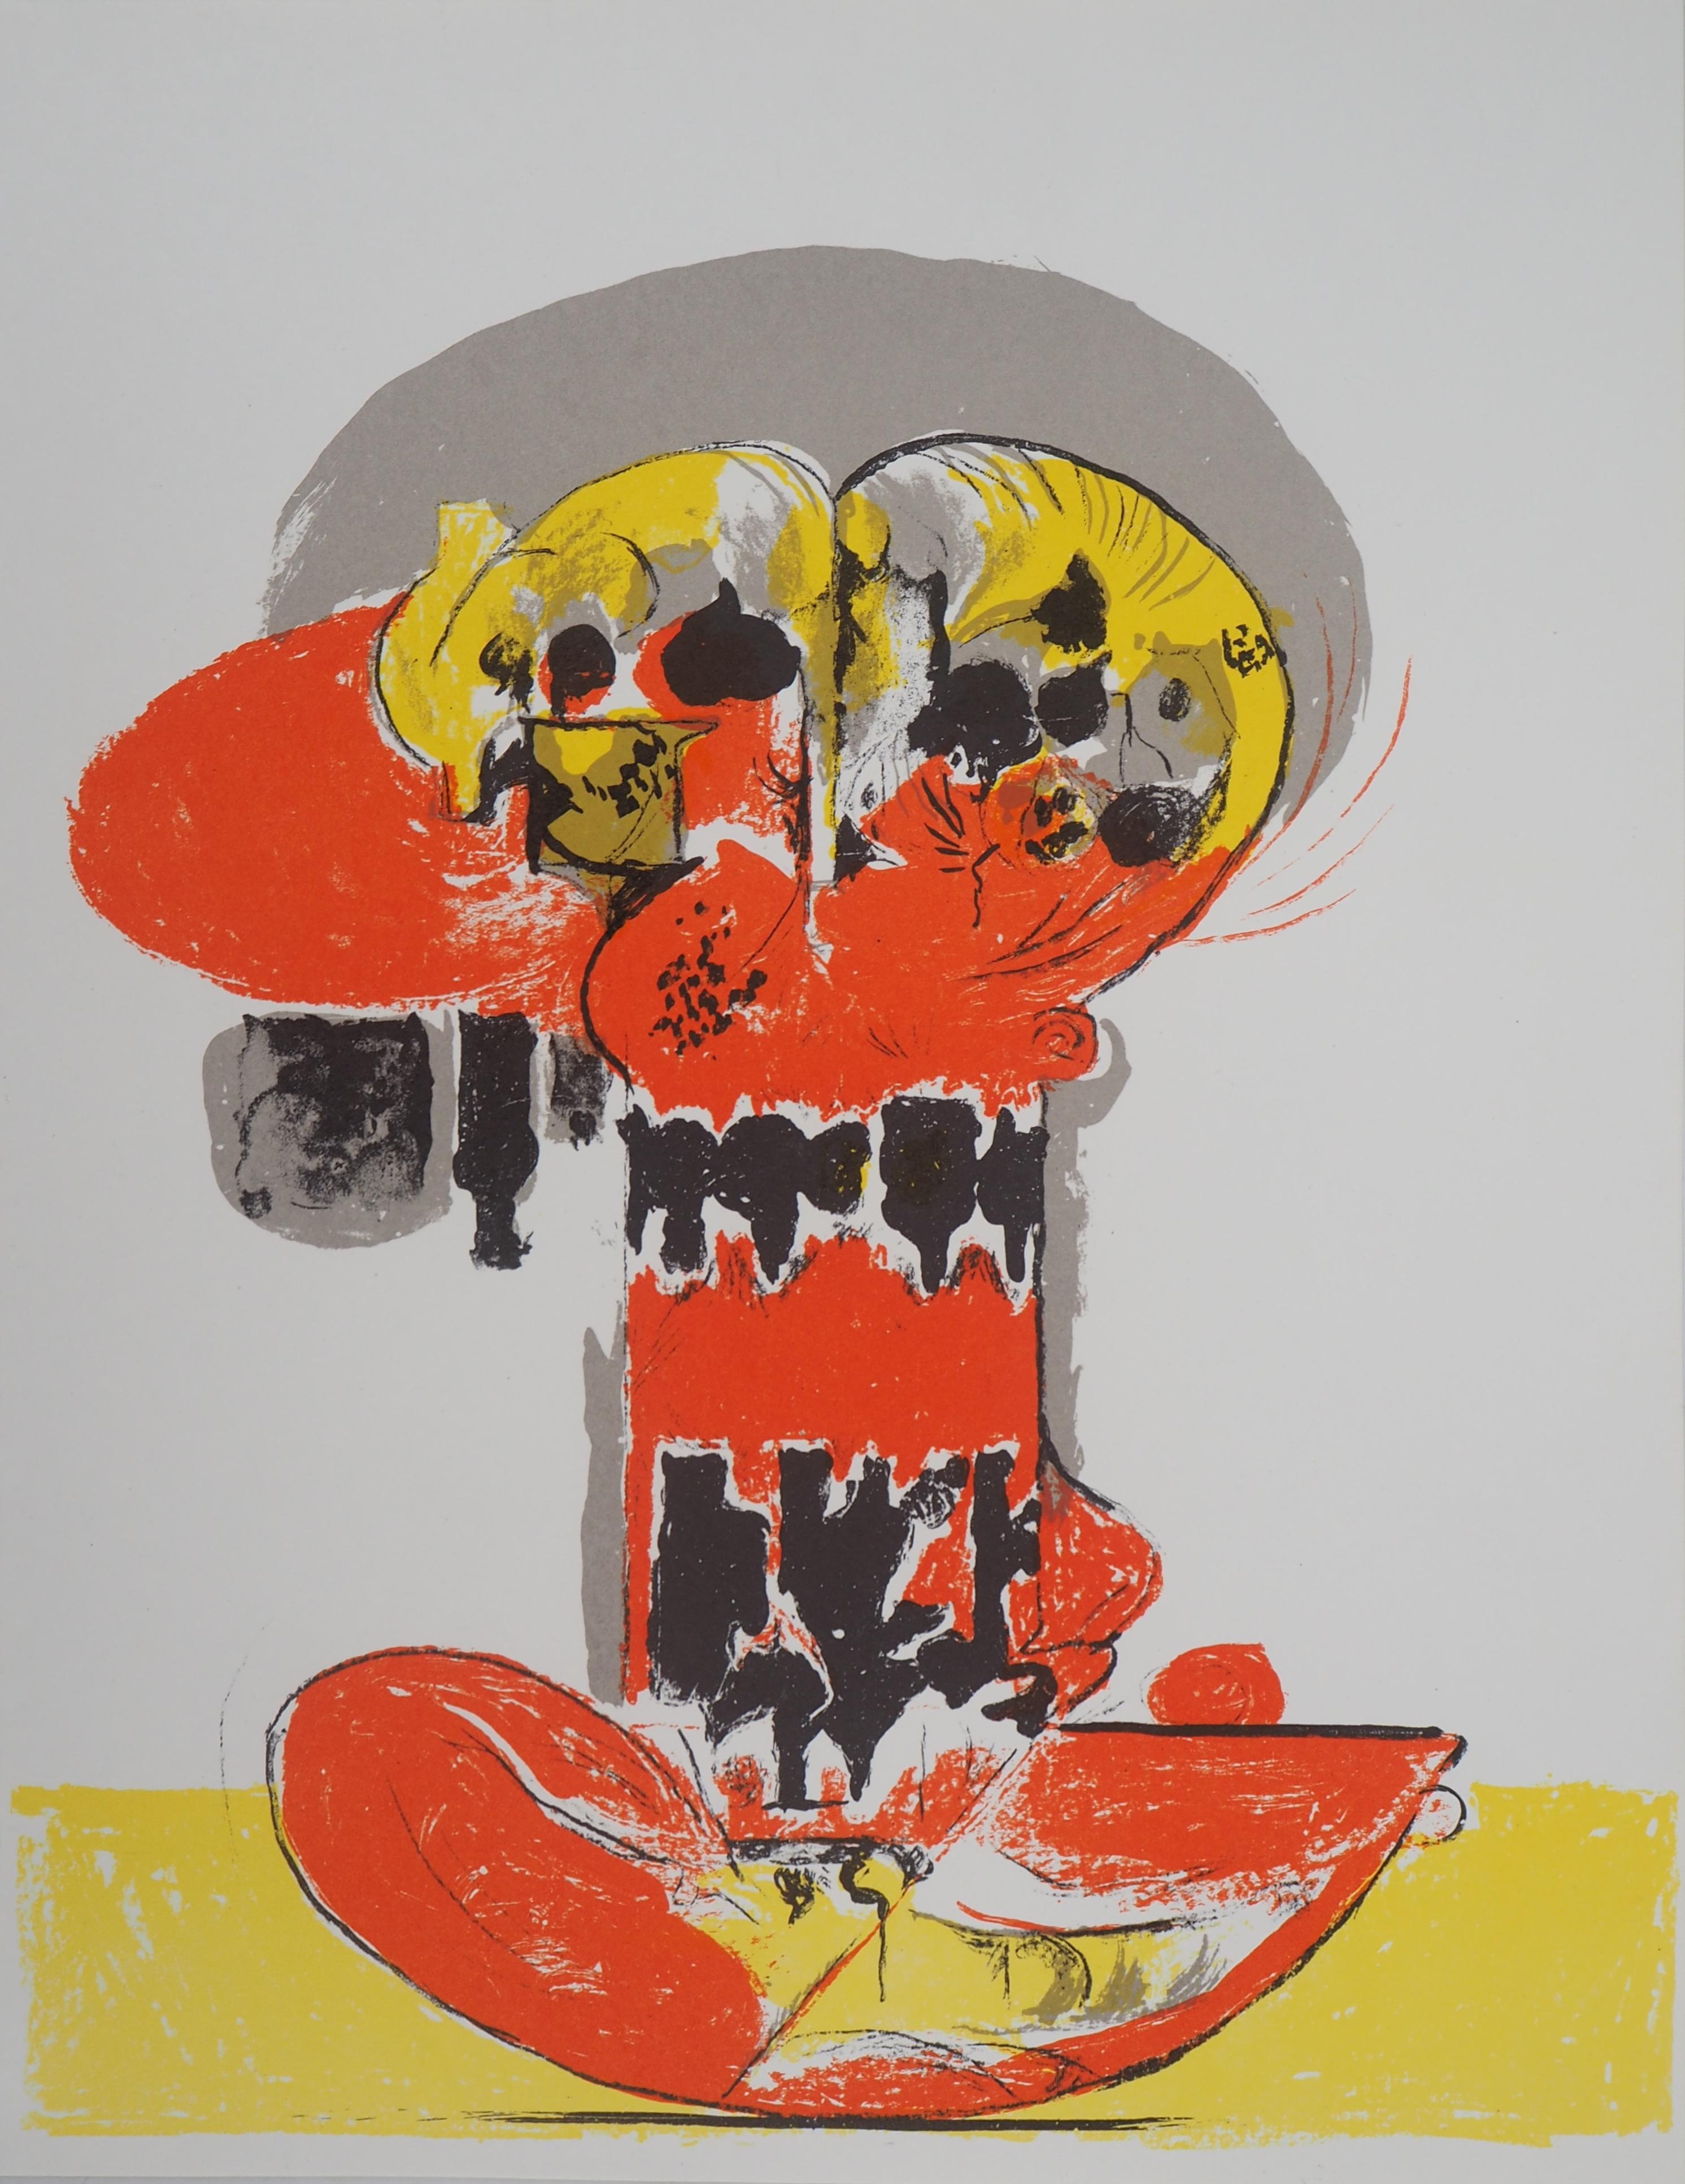 Graham Sutherland Abstract Print - Composition with yellow and red - Original lithograph - Mourlot, 1972